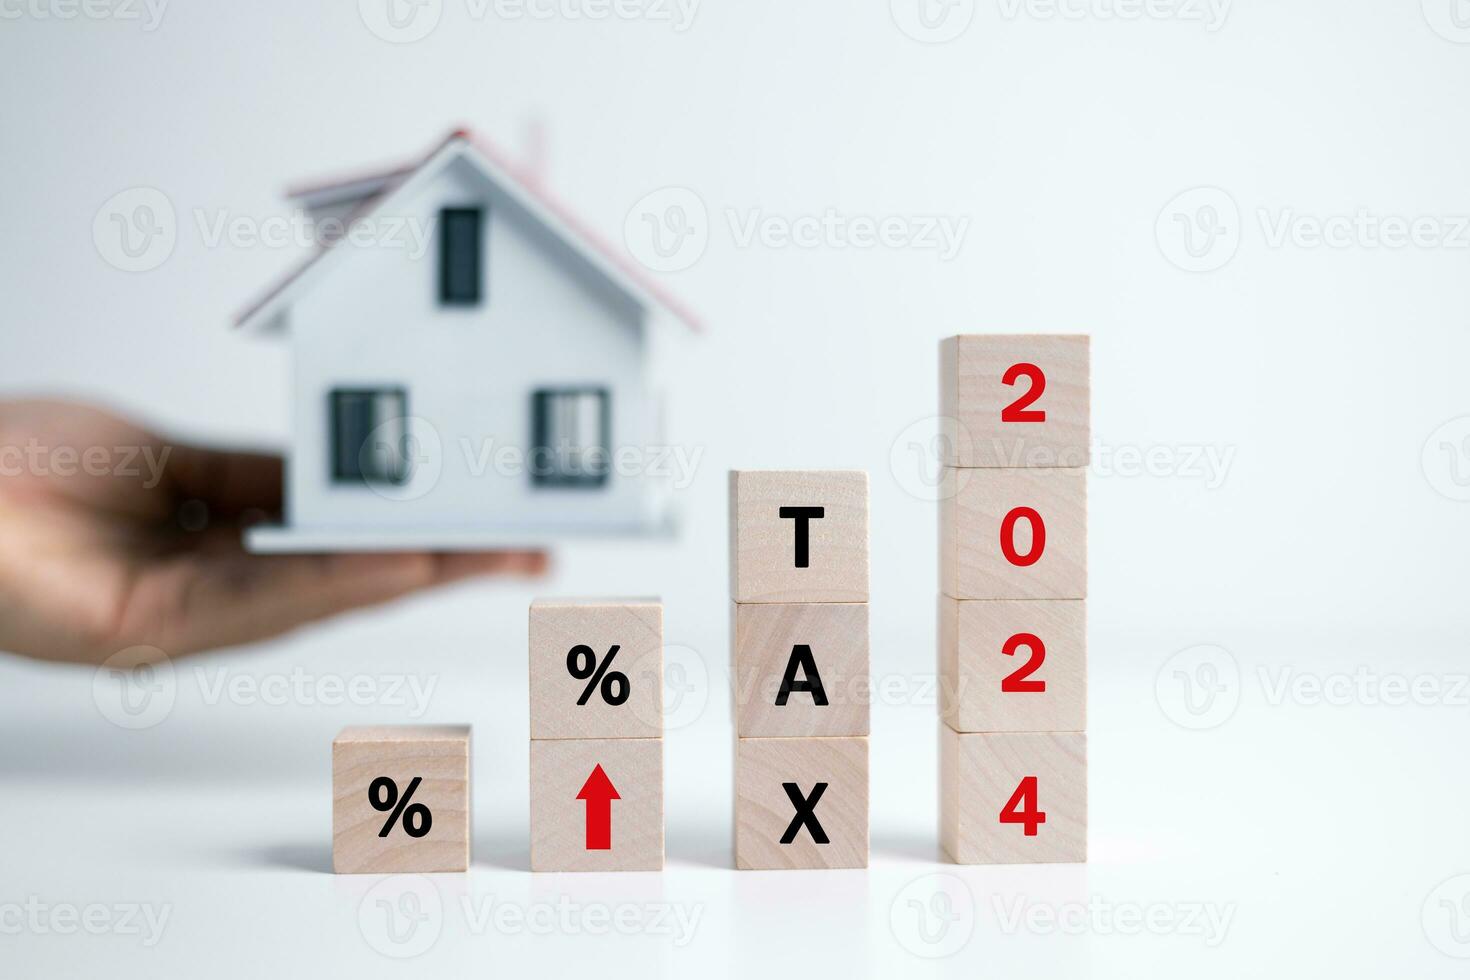 In 2024, businesses looking to invest in real estate may consider buying rental property. Property taxes, houses, planning percentages will increase likelihood of purchasing and making good profits. photo